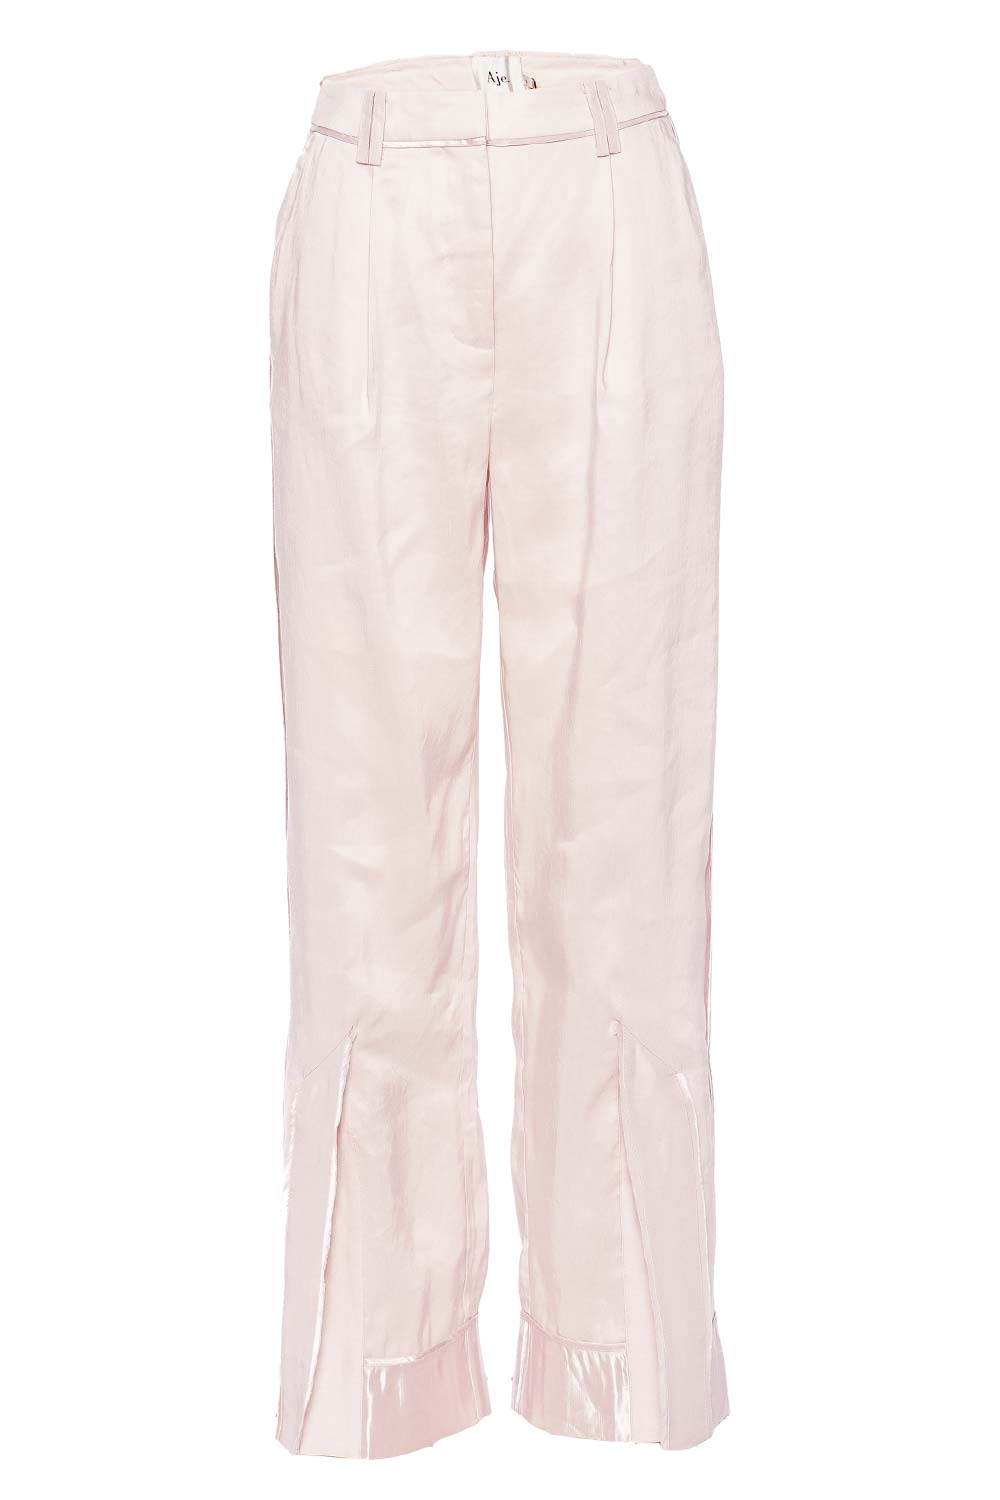 Aje. Insight Soft Pink Deconstructed Pant